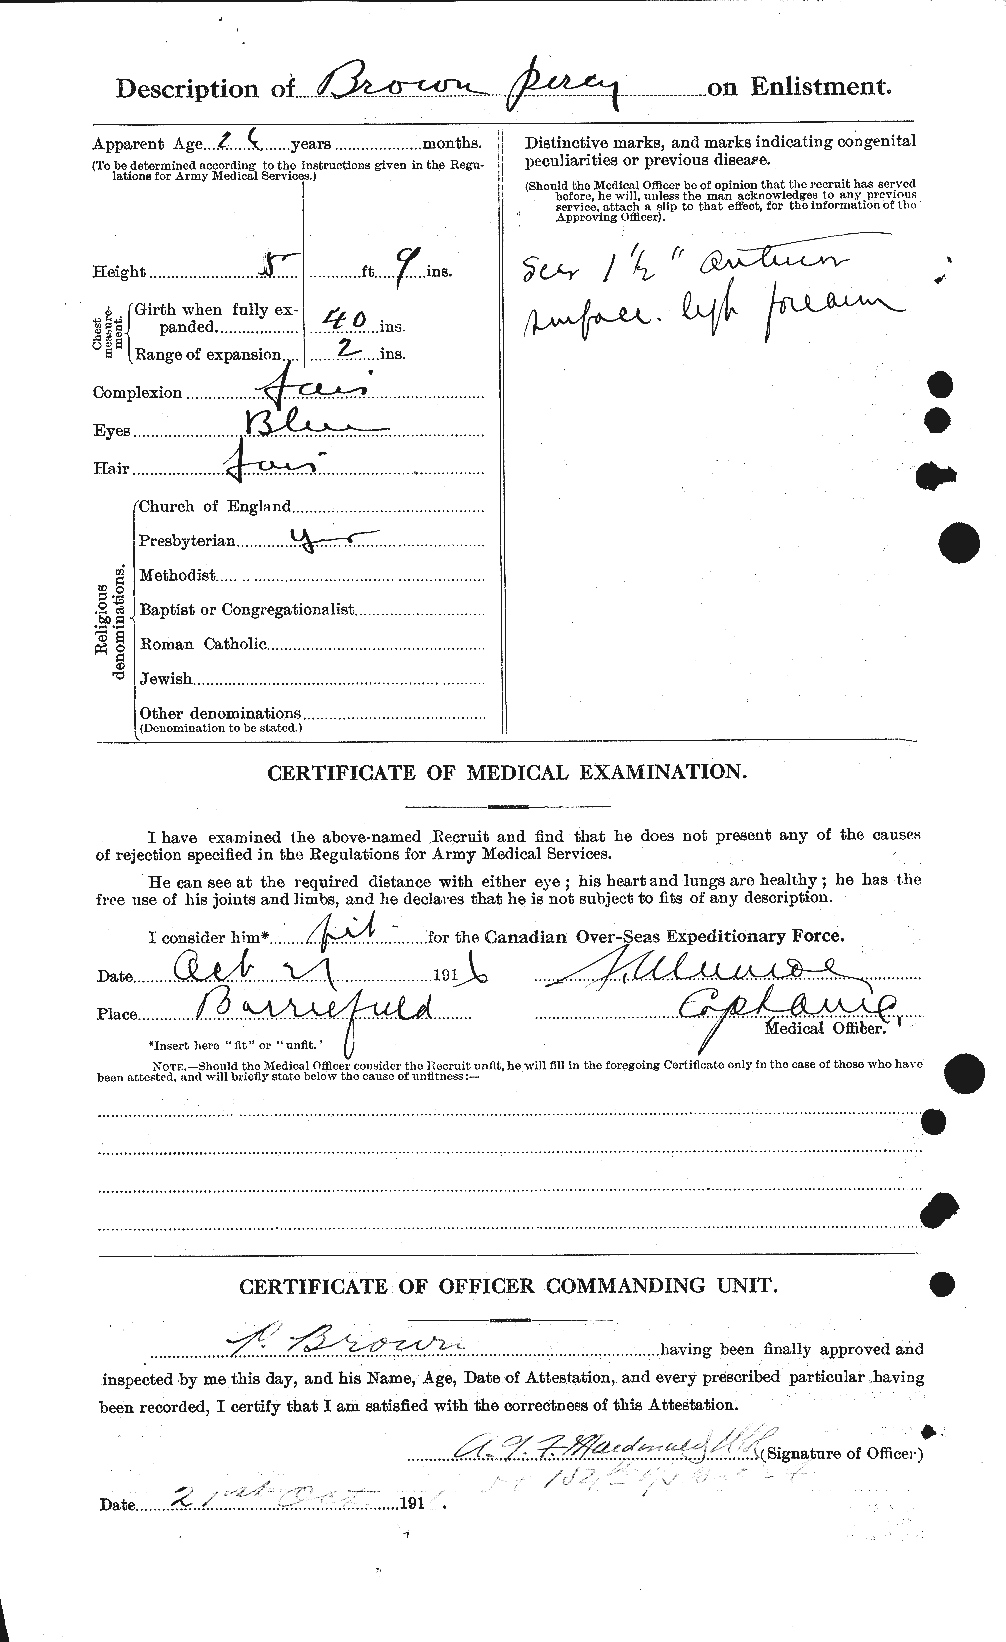 Personnel Records of the First World War - CEF 267158b